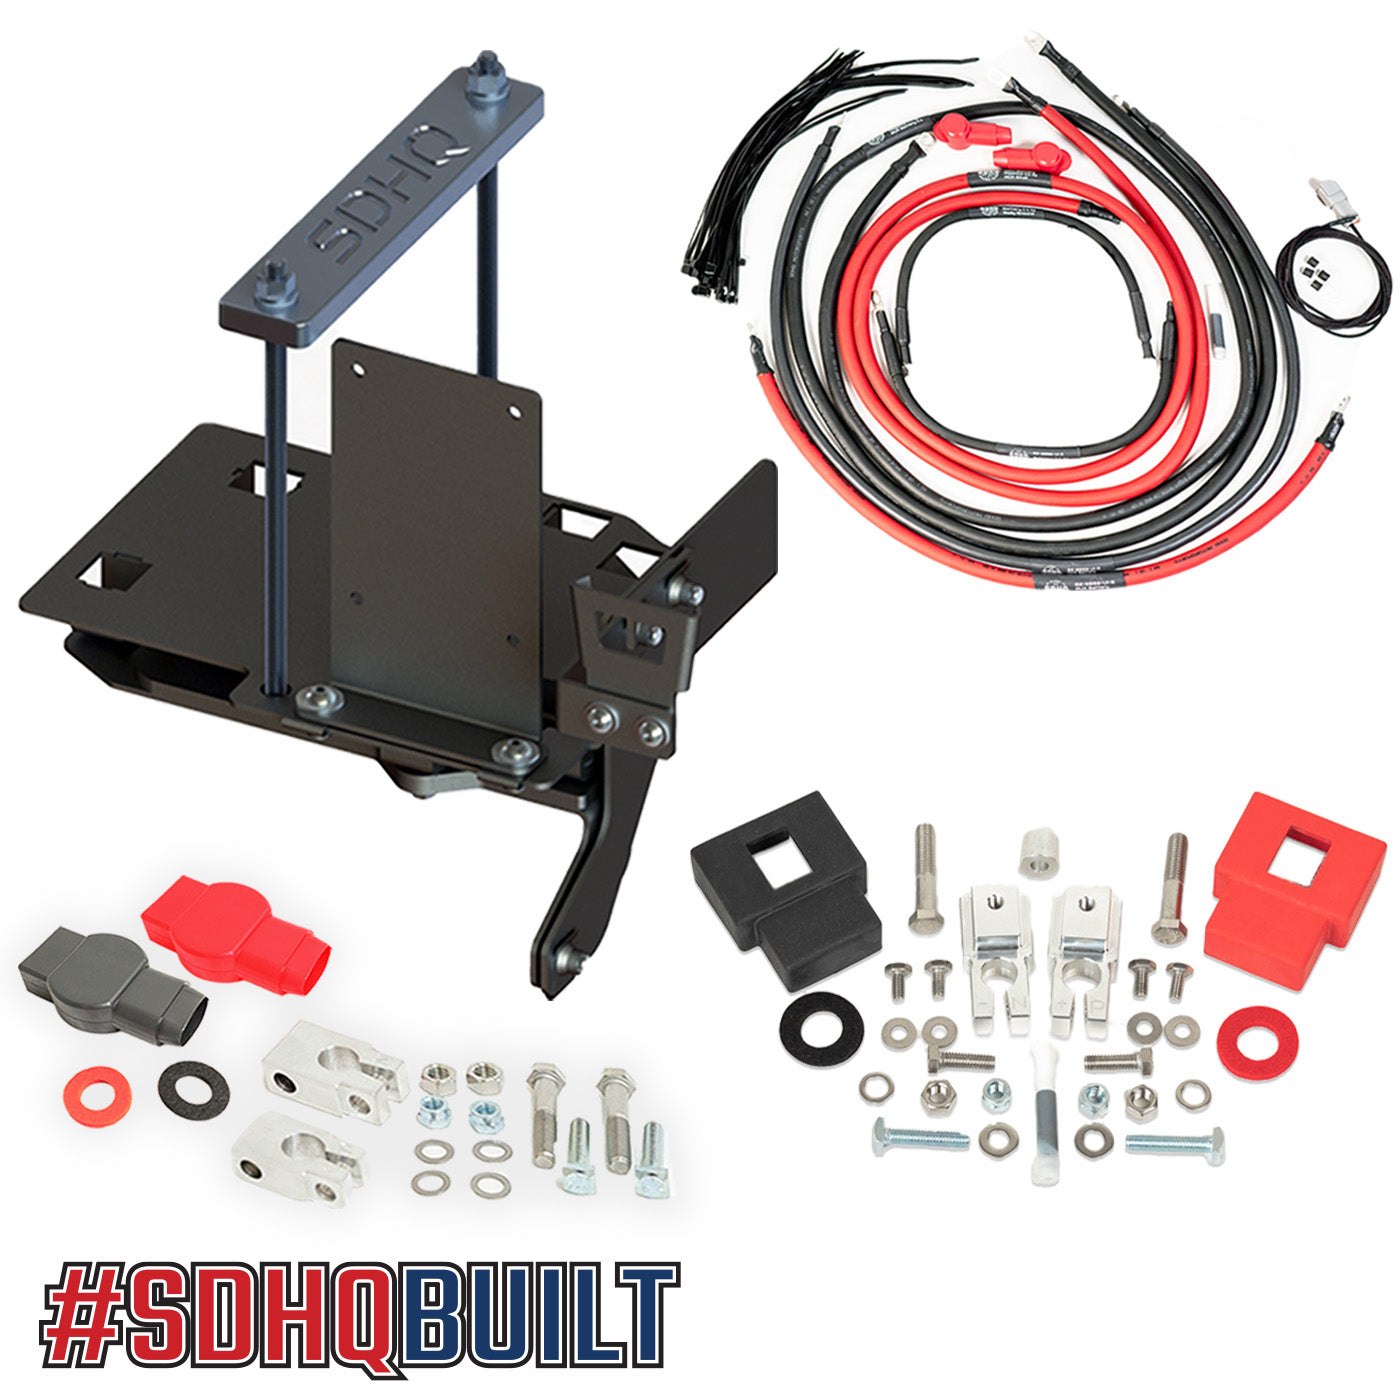 '07-21 Toyota Tundra SDHQ Built "Build your Own" Dual Battery Kit parts